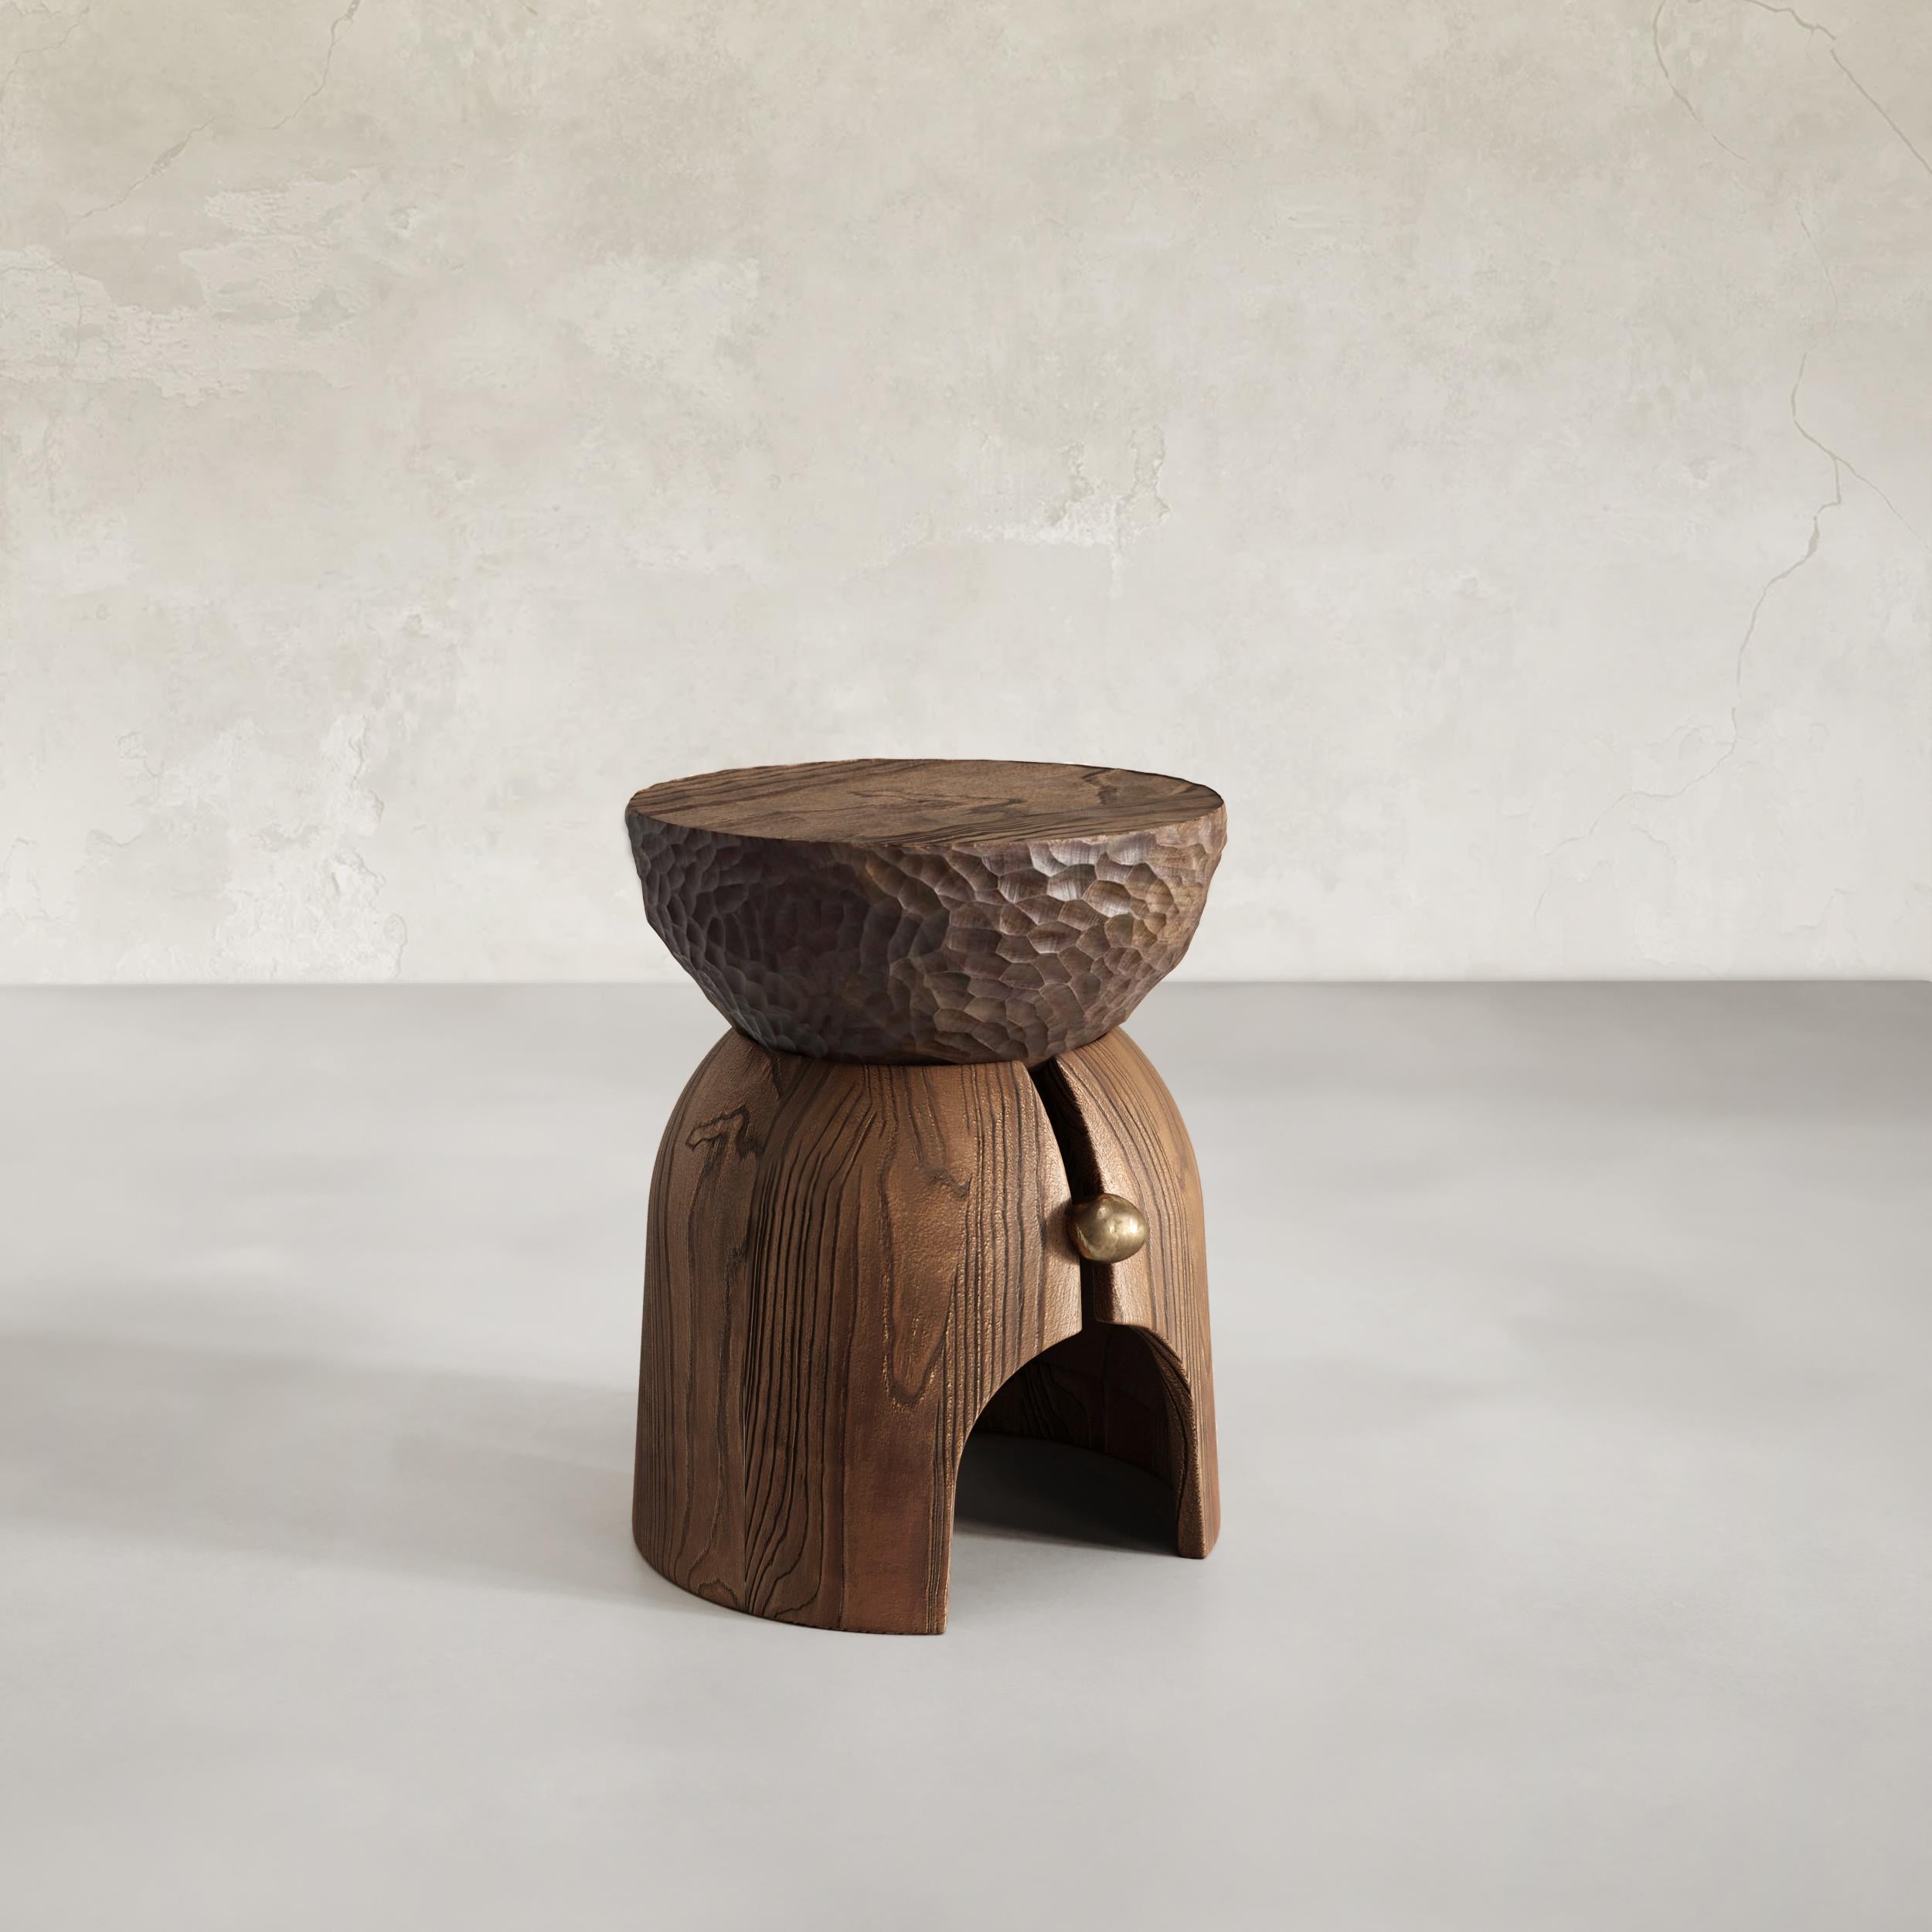 The Mars Side Table is a handcrafted piece of furniture that combines solid wood and liquid bronze for a unique appearance. The table is made using traditional techniques such as hand carving and casting, ensuring that each piece is one-of-a-kind